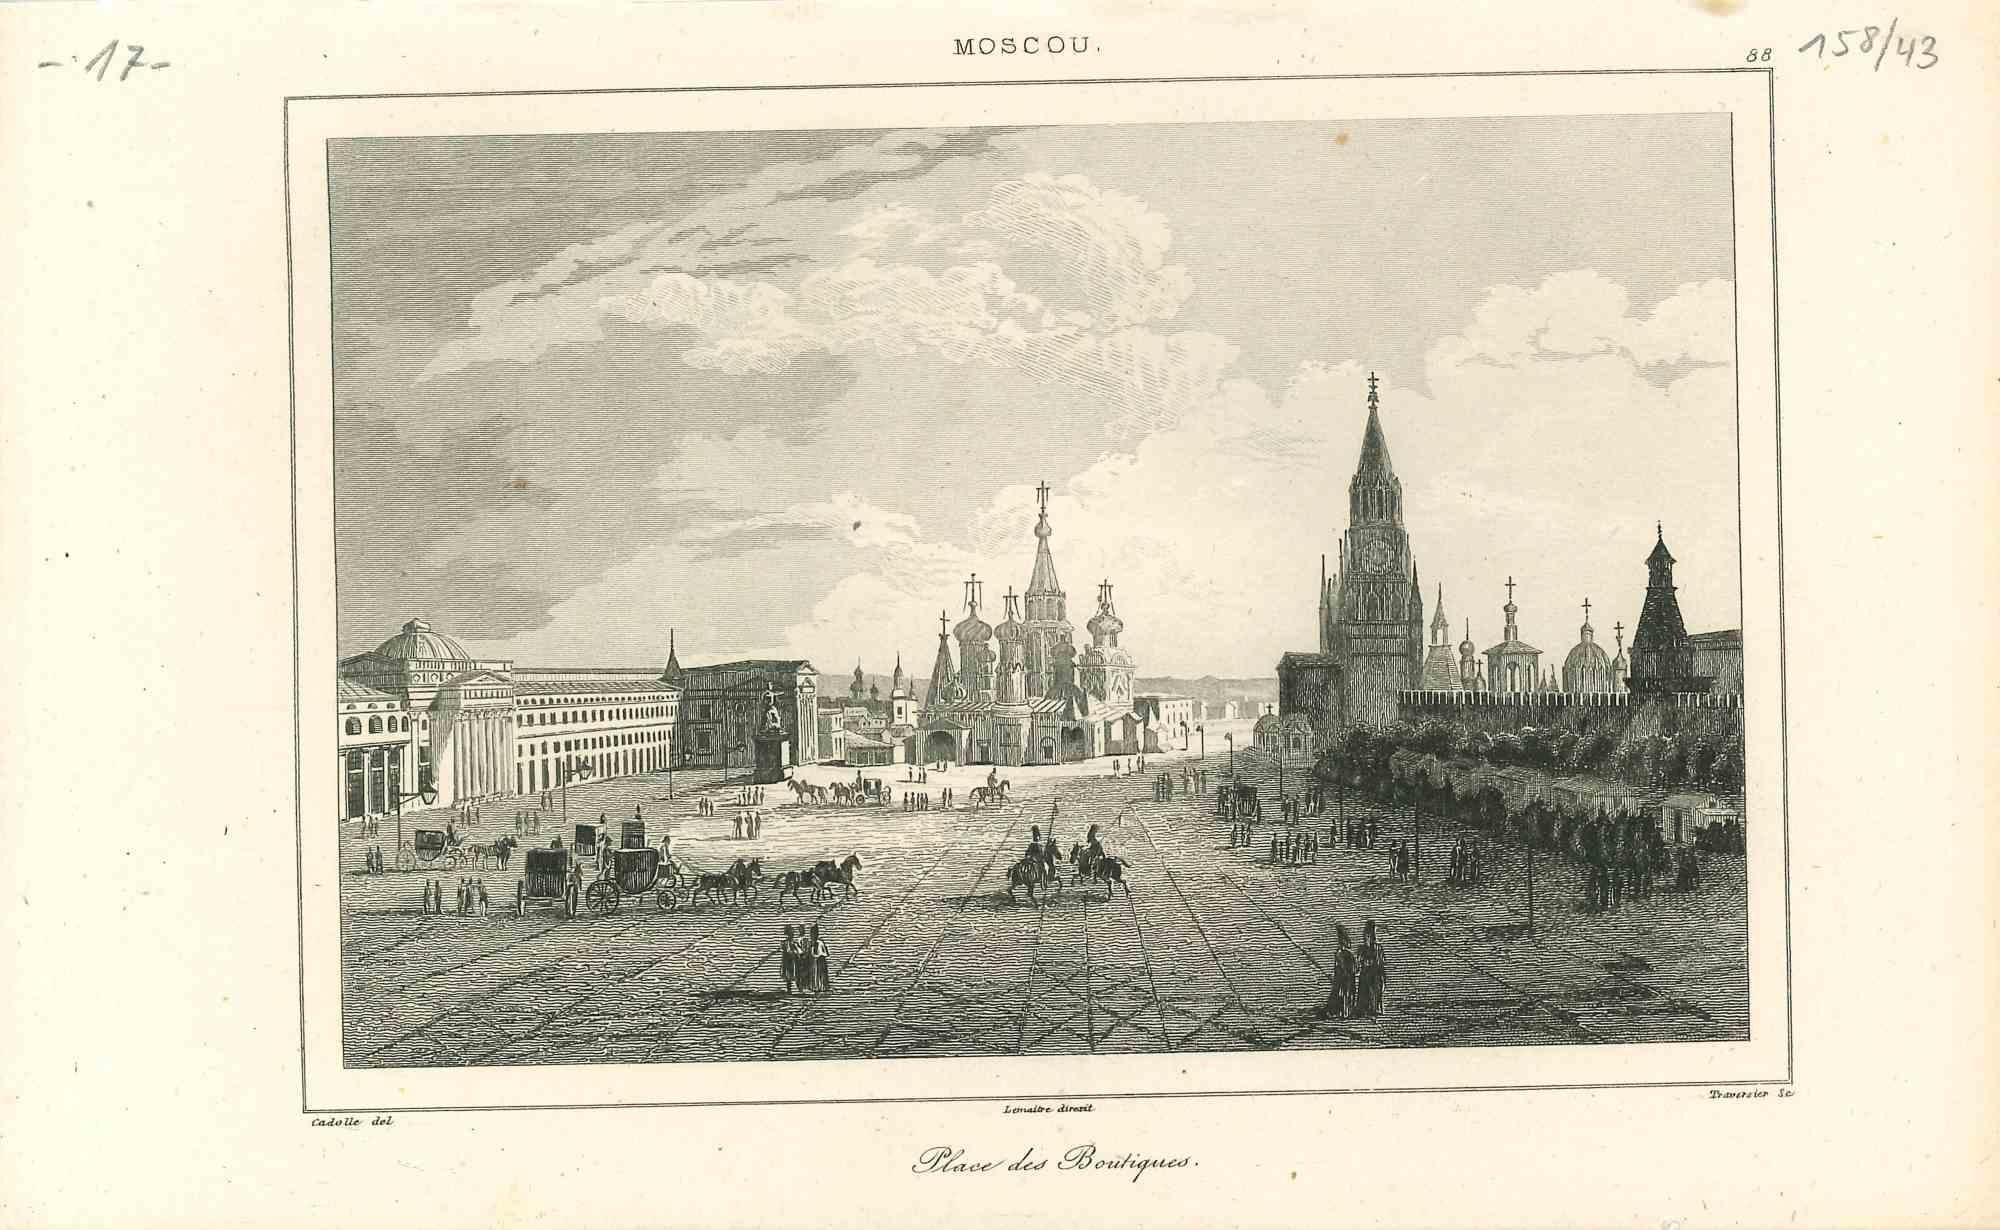 Unknown Figurative Print - Ancient View of Place des Boutiques in Moscow - Original Lithograph - 1850s